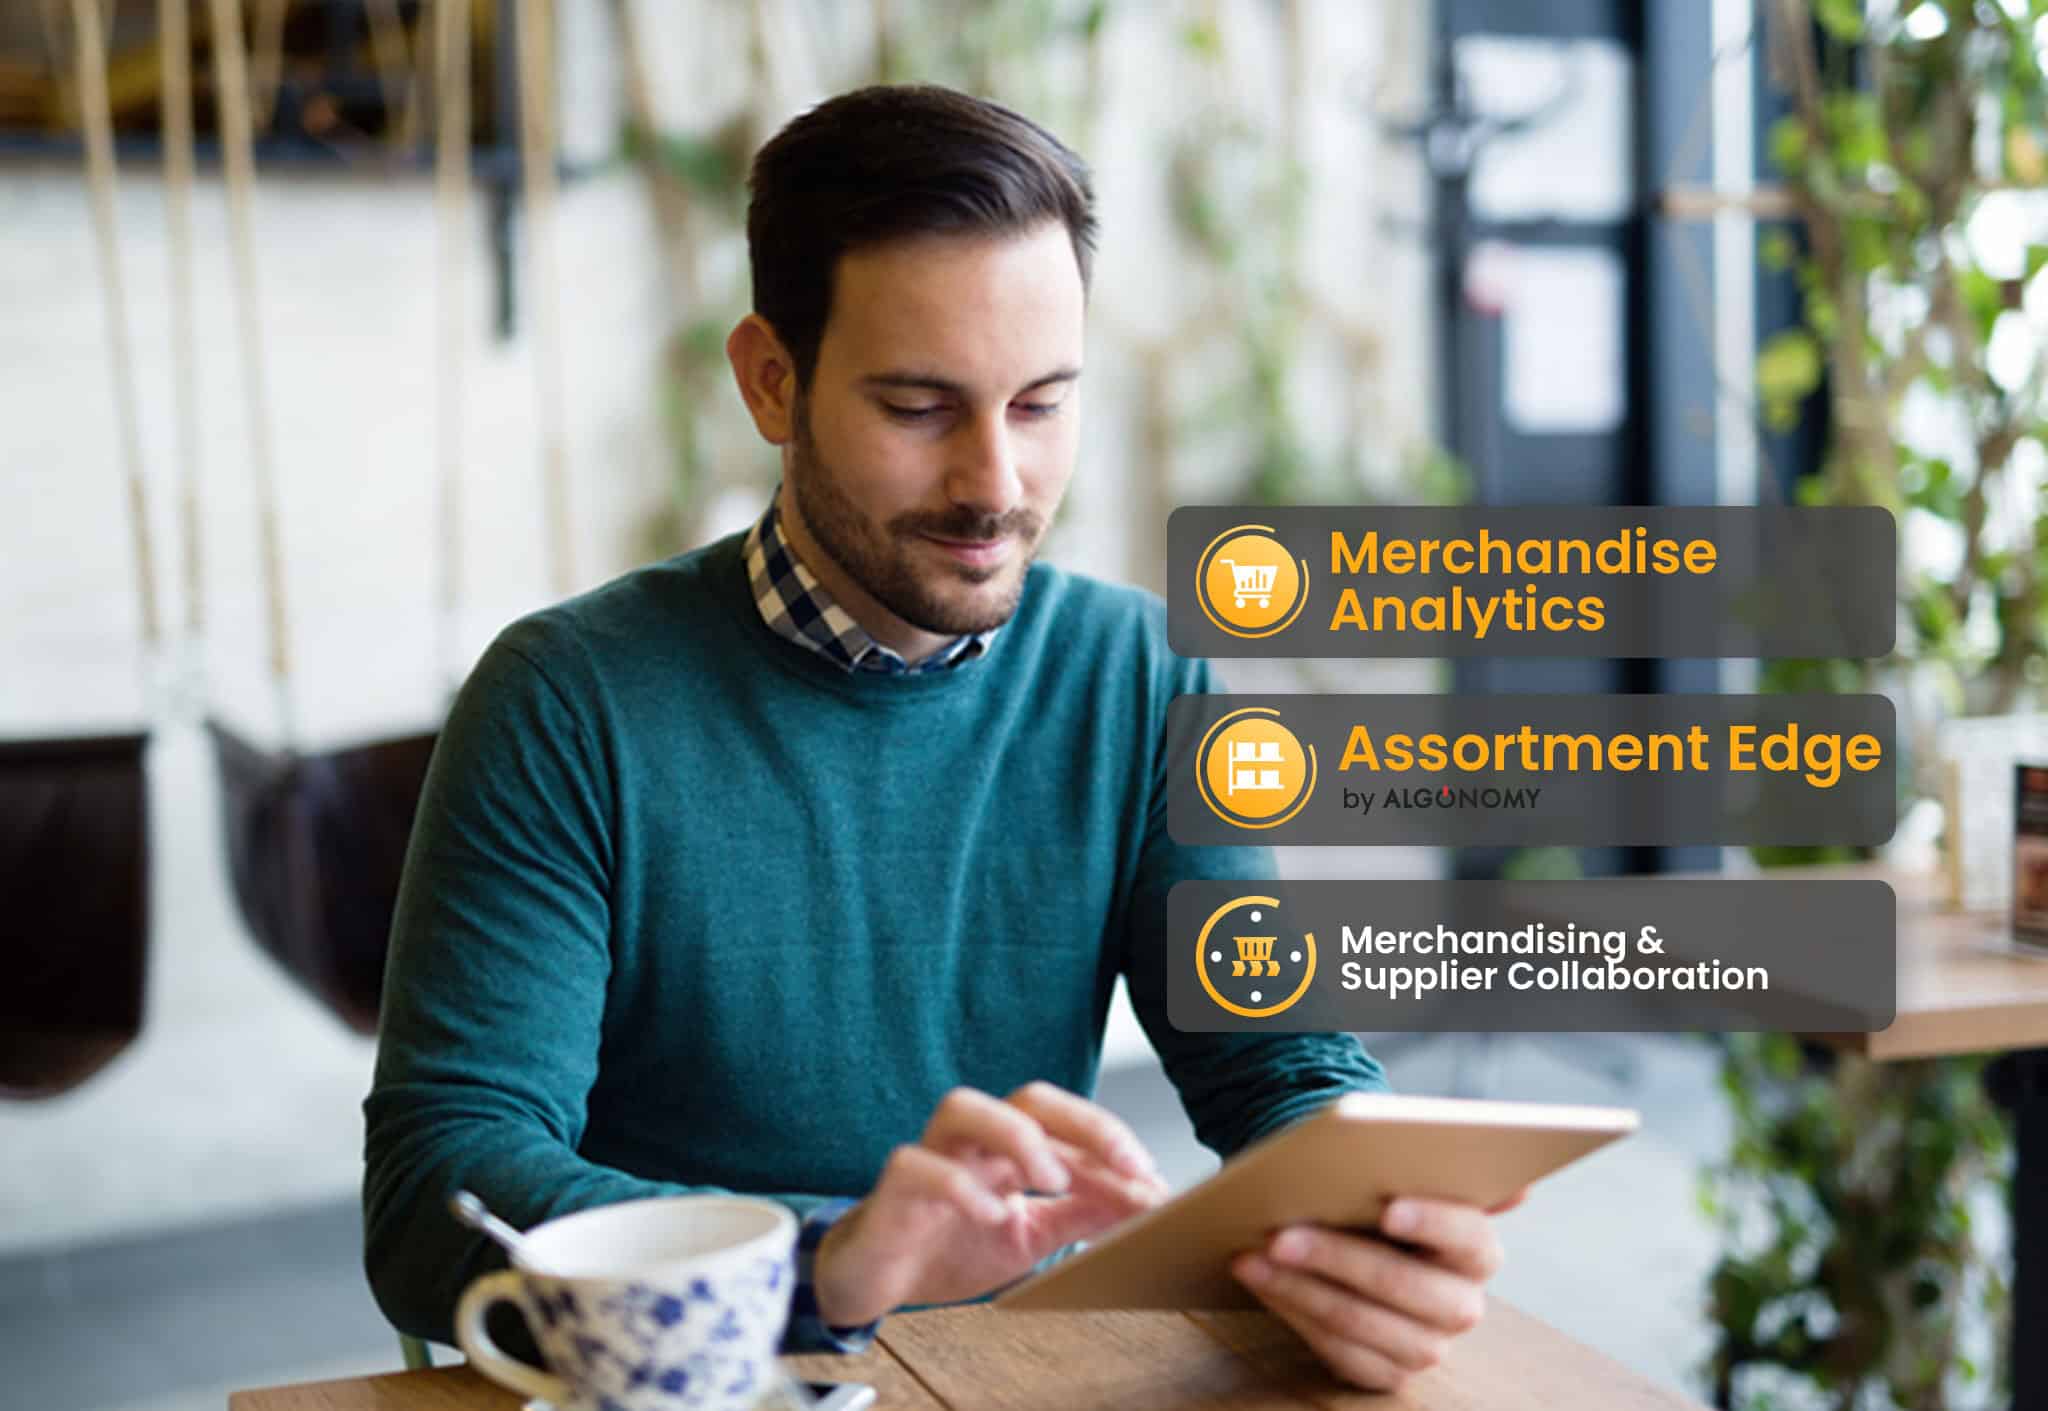 Customer-centric Algorithmic Merchandising: More Pertinent than Ever for Retail